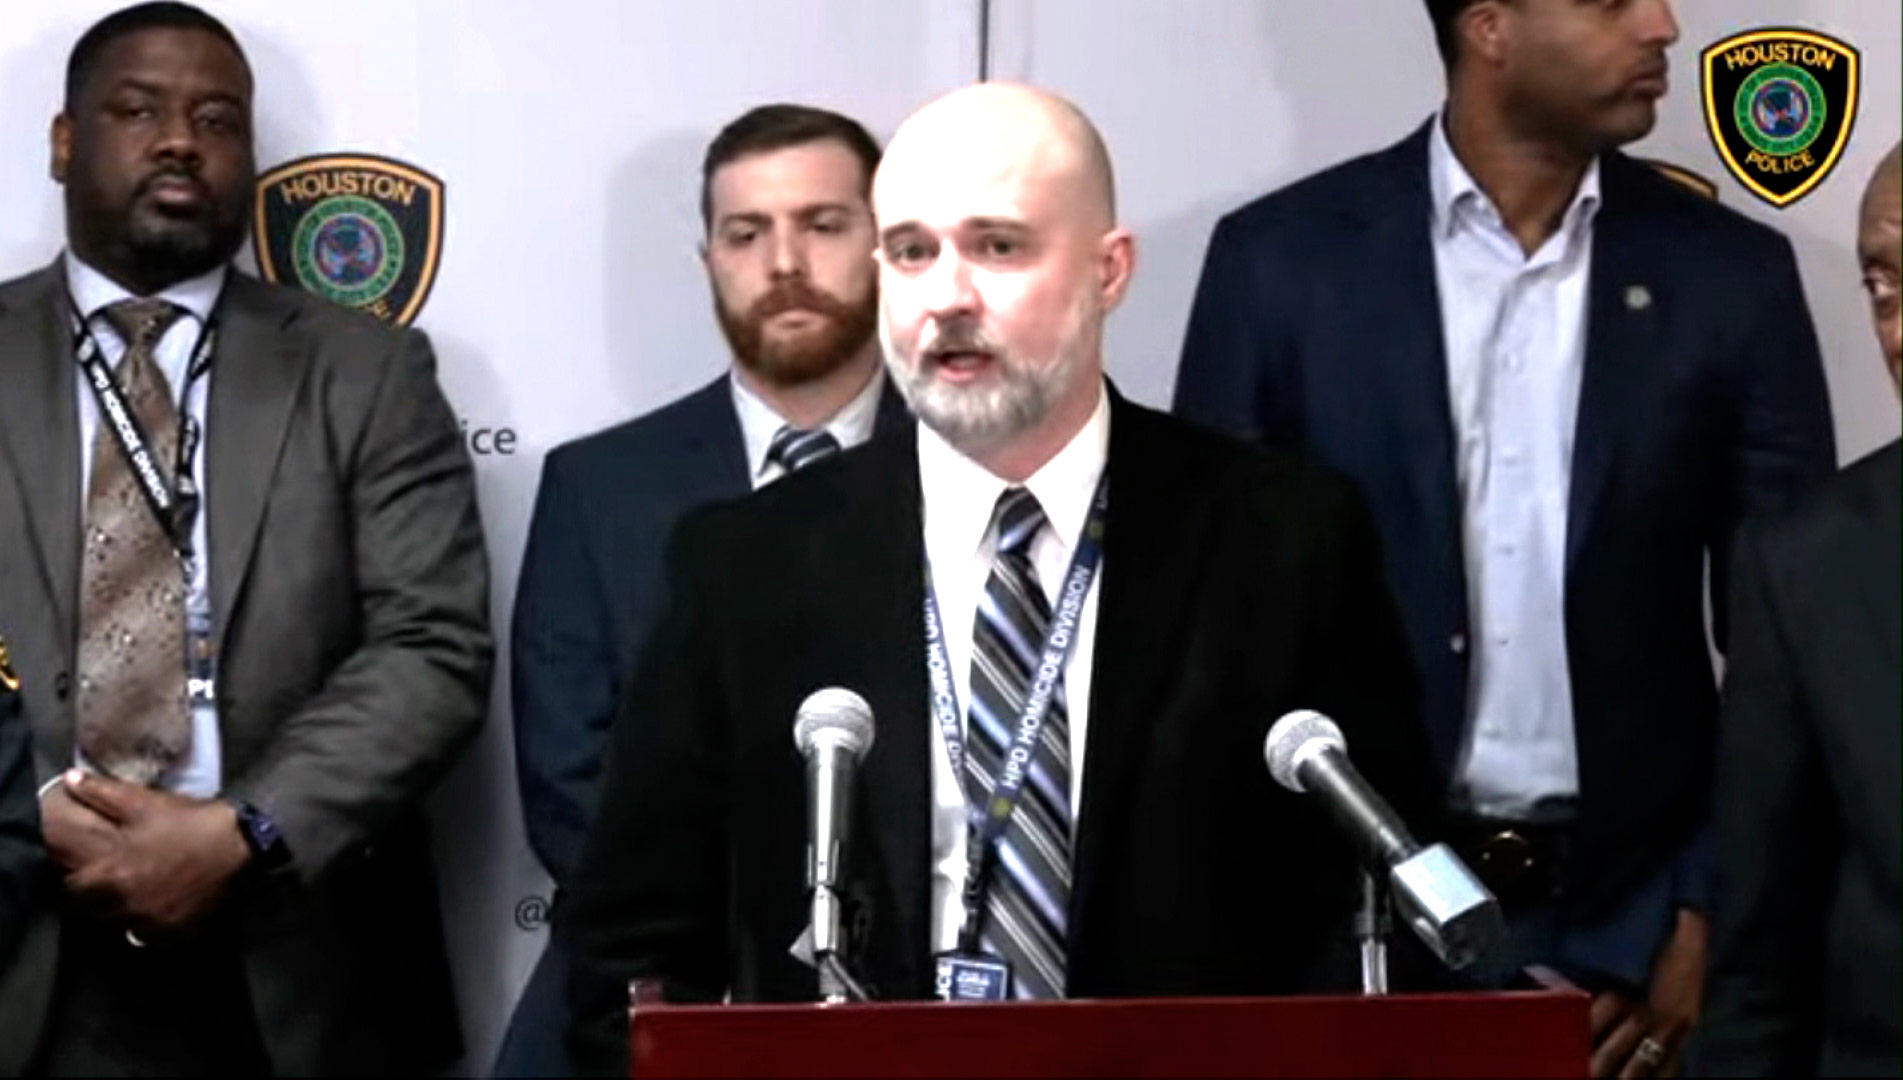 Sgt. Michael Burrow speaks during a press conference on Friday, December 2. 